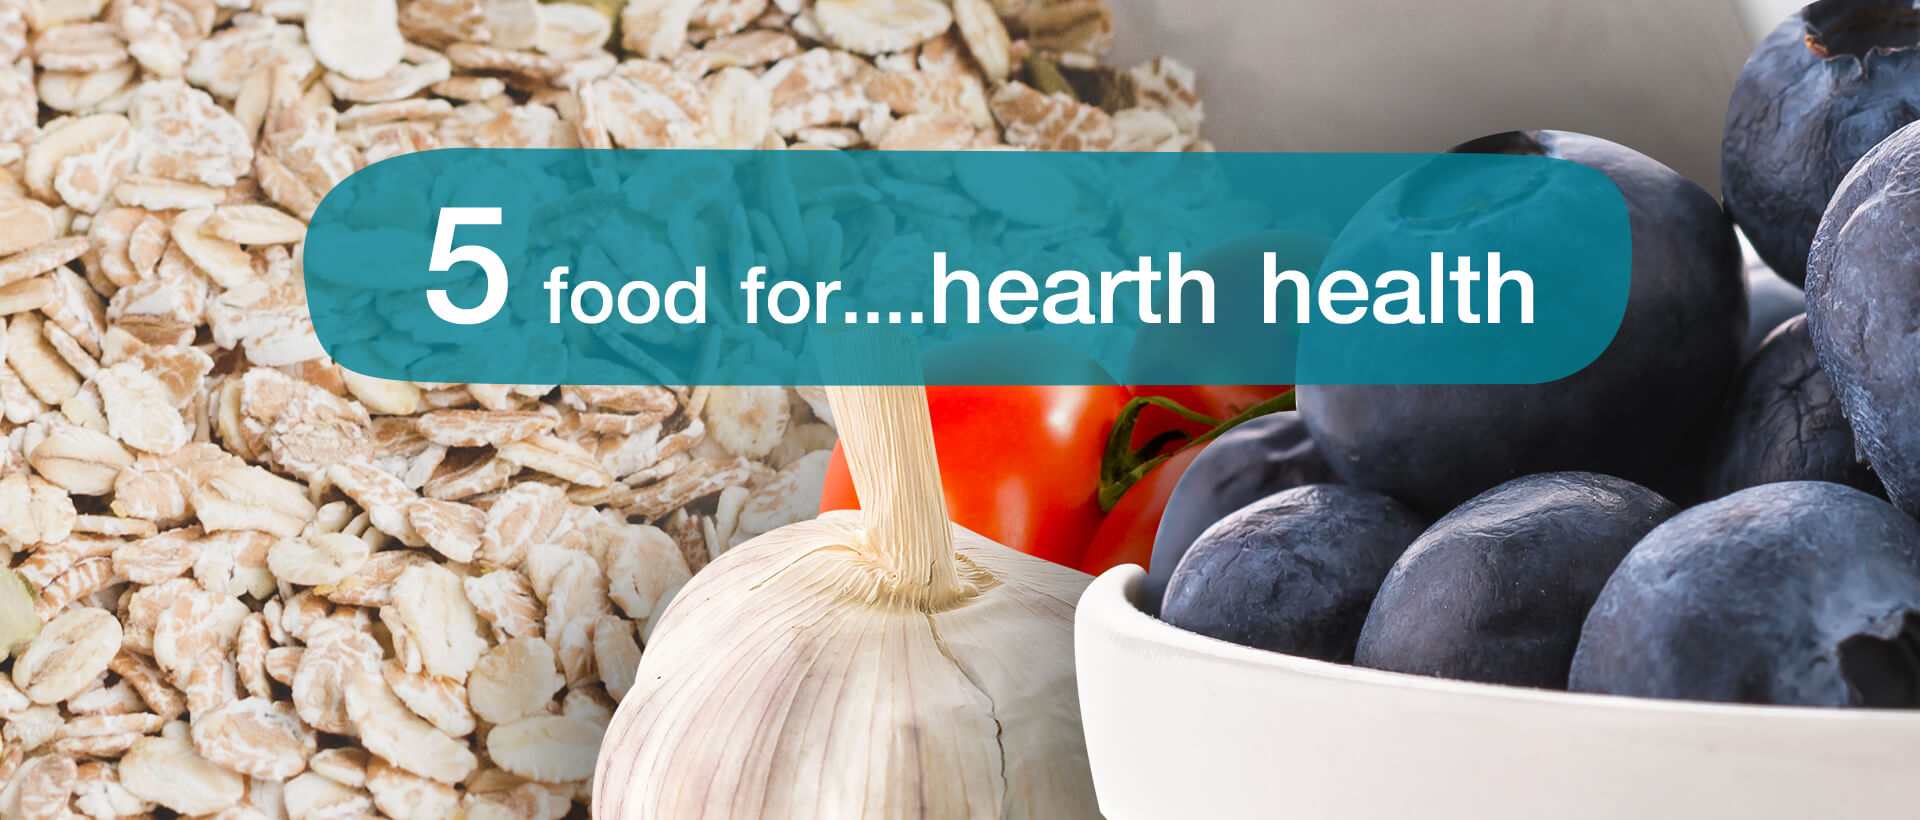 5 foods for heart health